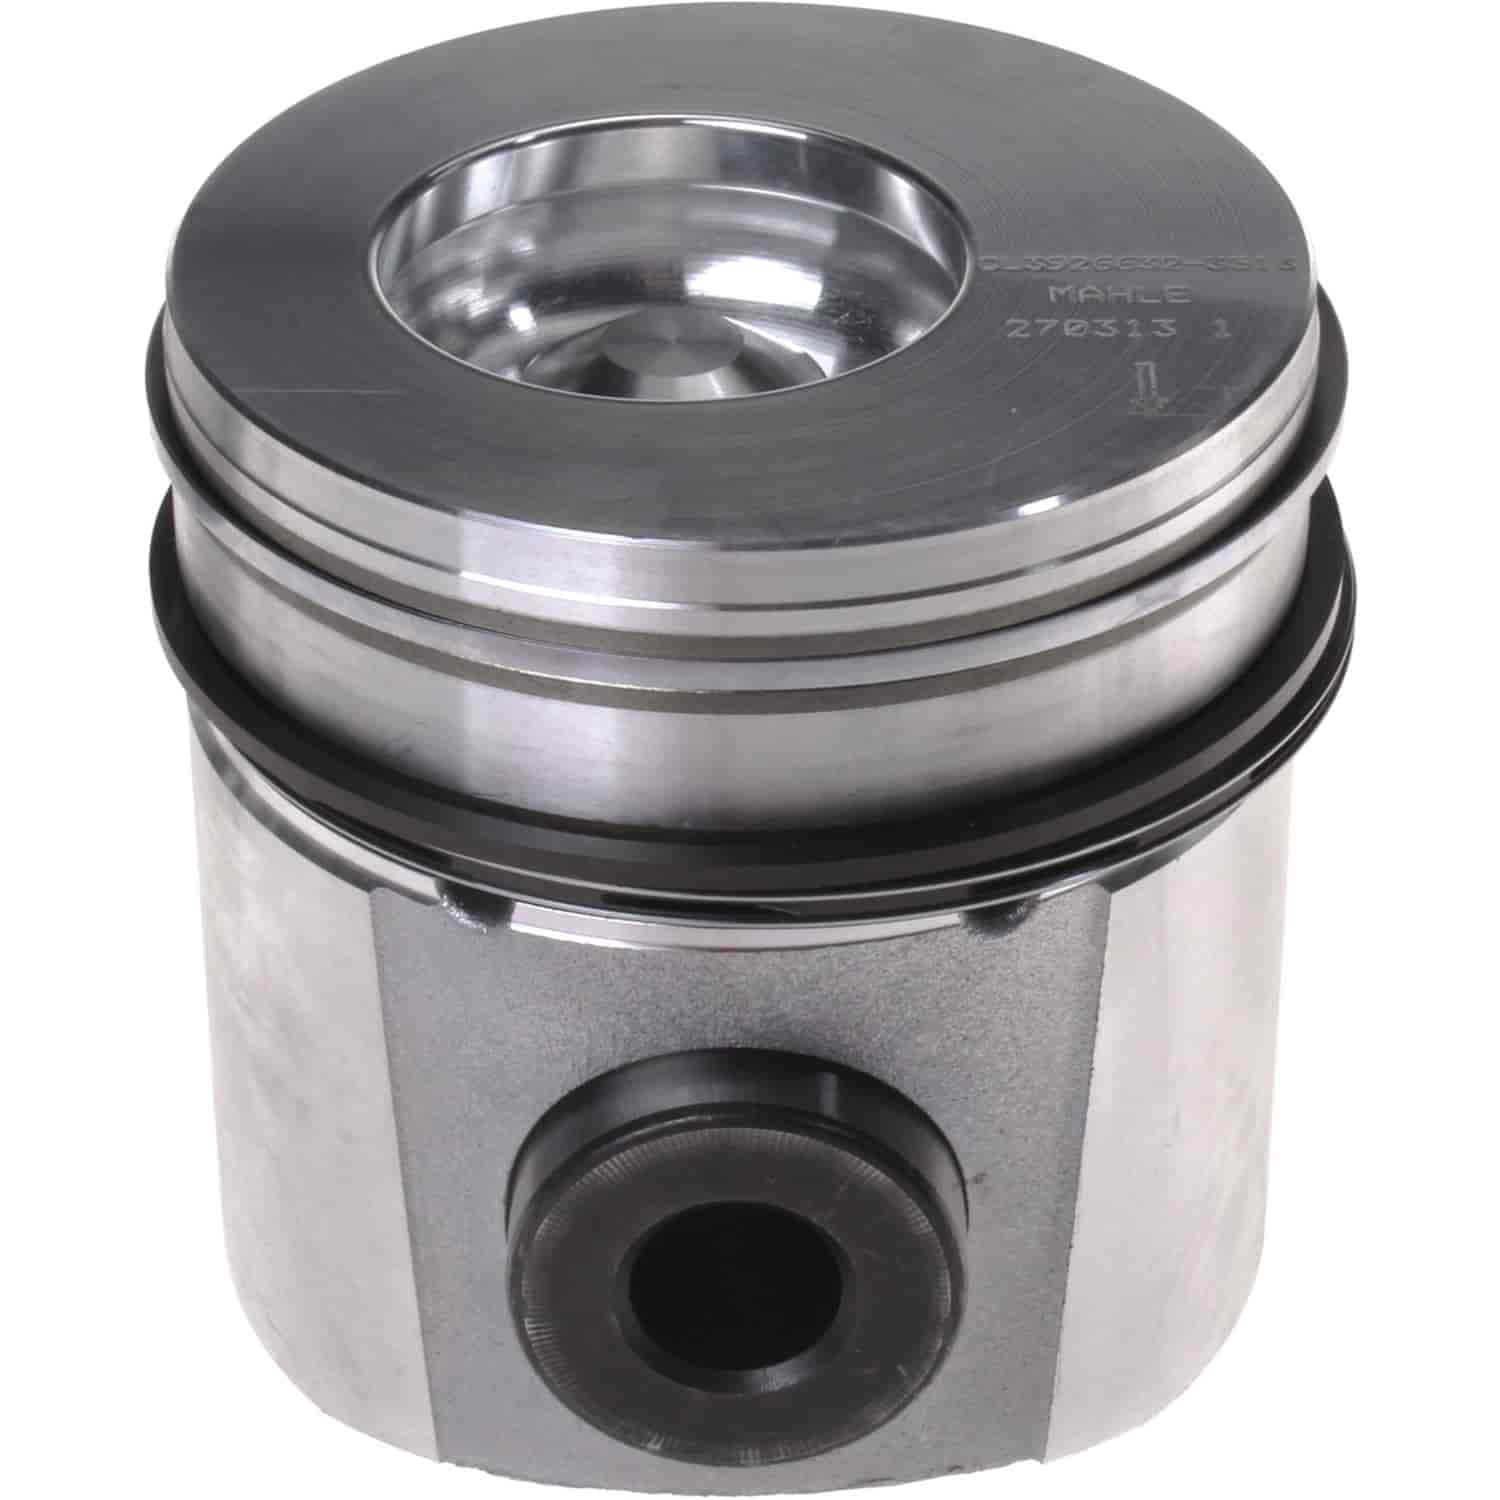 Piston and Rings Set 1994-1998 Dodge, Fits Cummins Diesel L6 5.9L with 4.016" Bore (Standard)